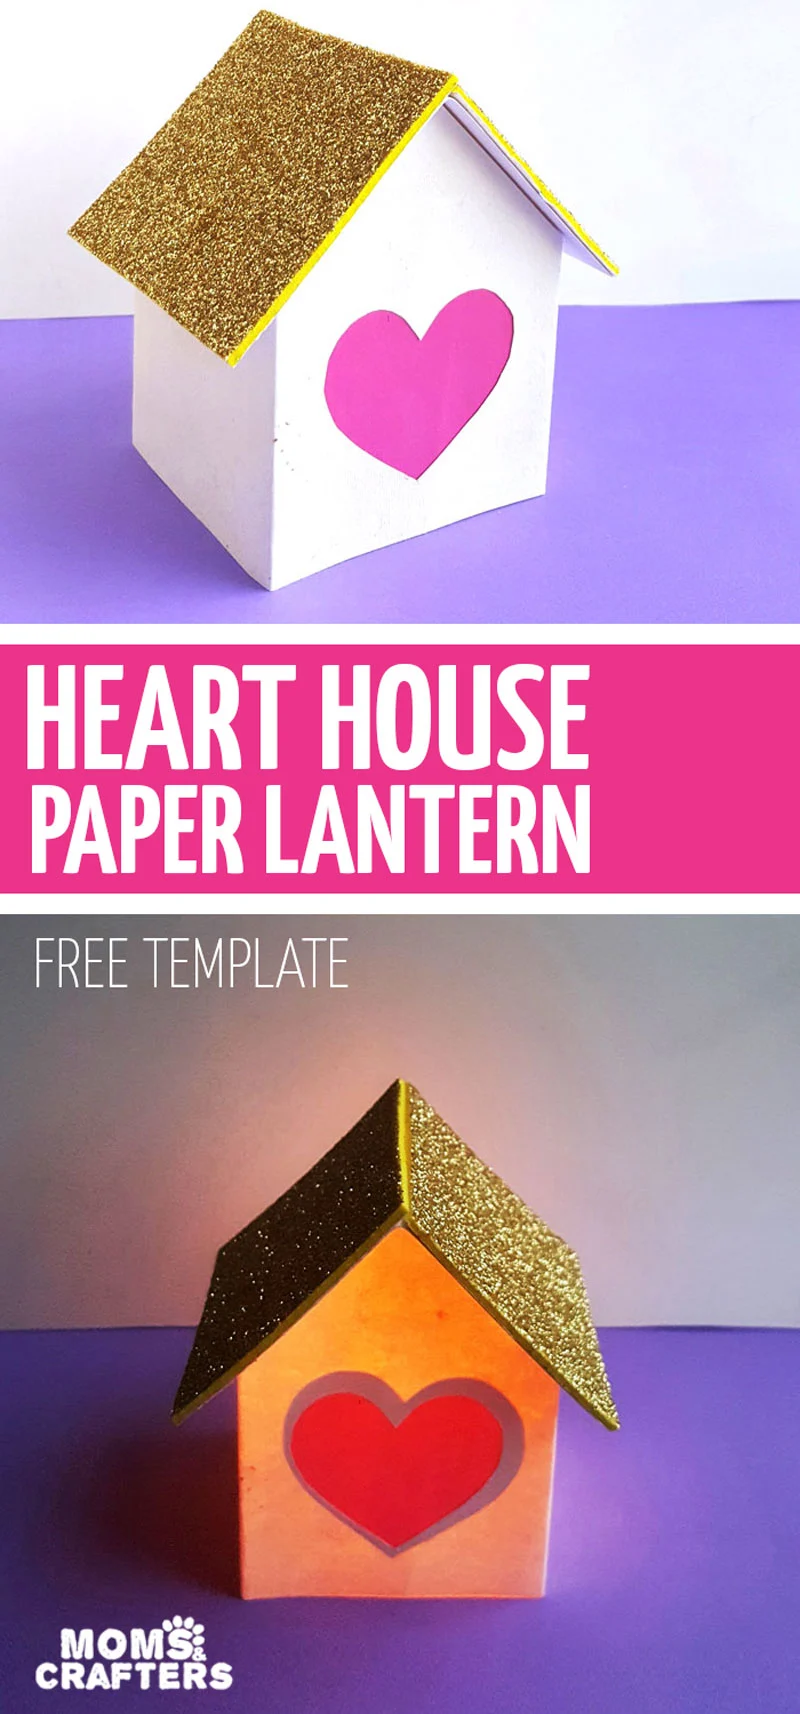 These fun valentine paper lanterns come with a free template for you to enjoy! A fun valentine's day hearts paper craft, this sweet house lantern is fun for kids, teens, and grown-ups